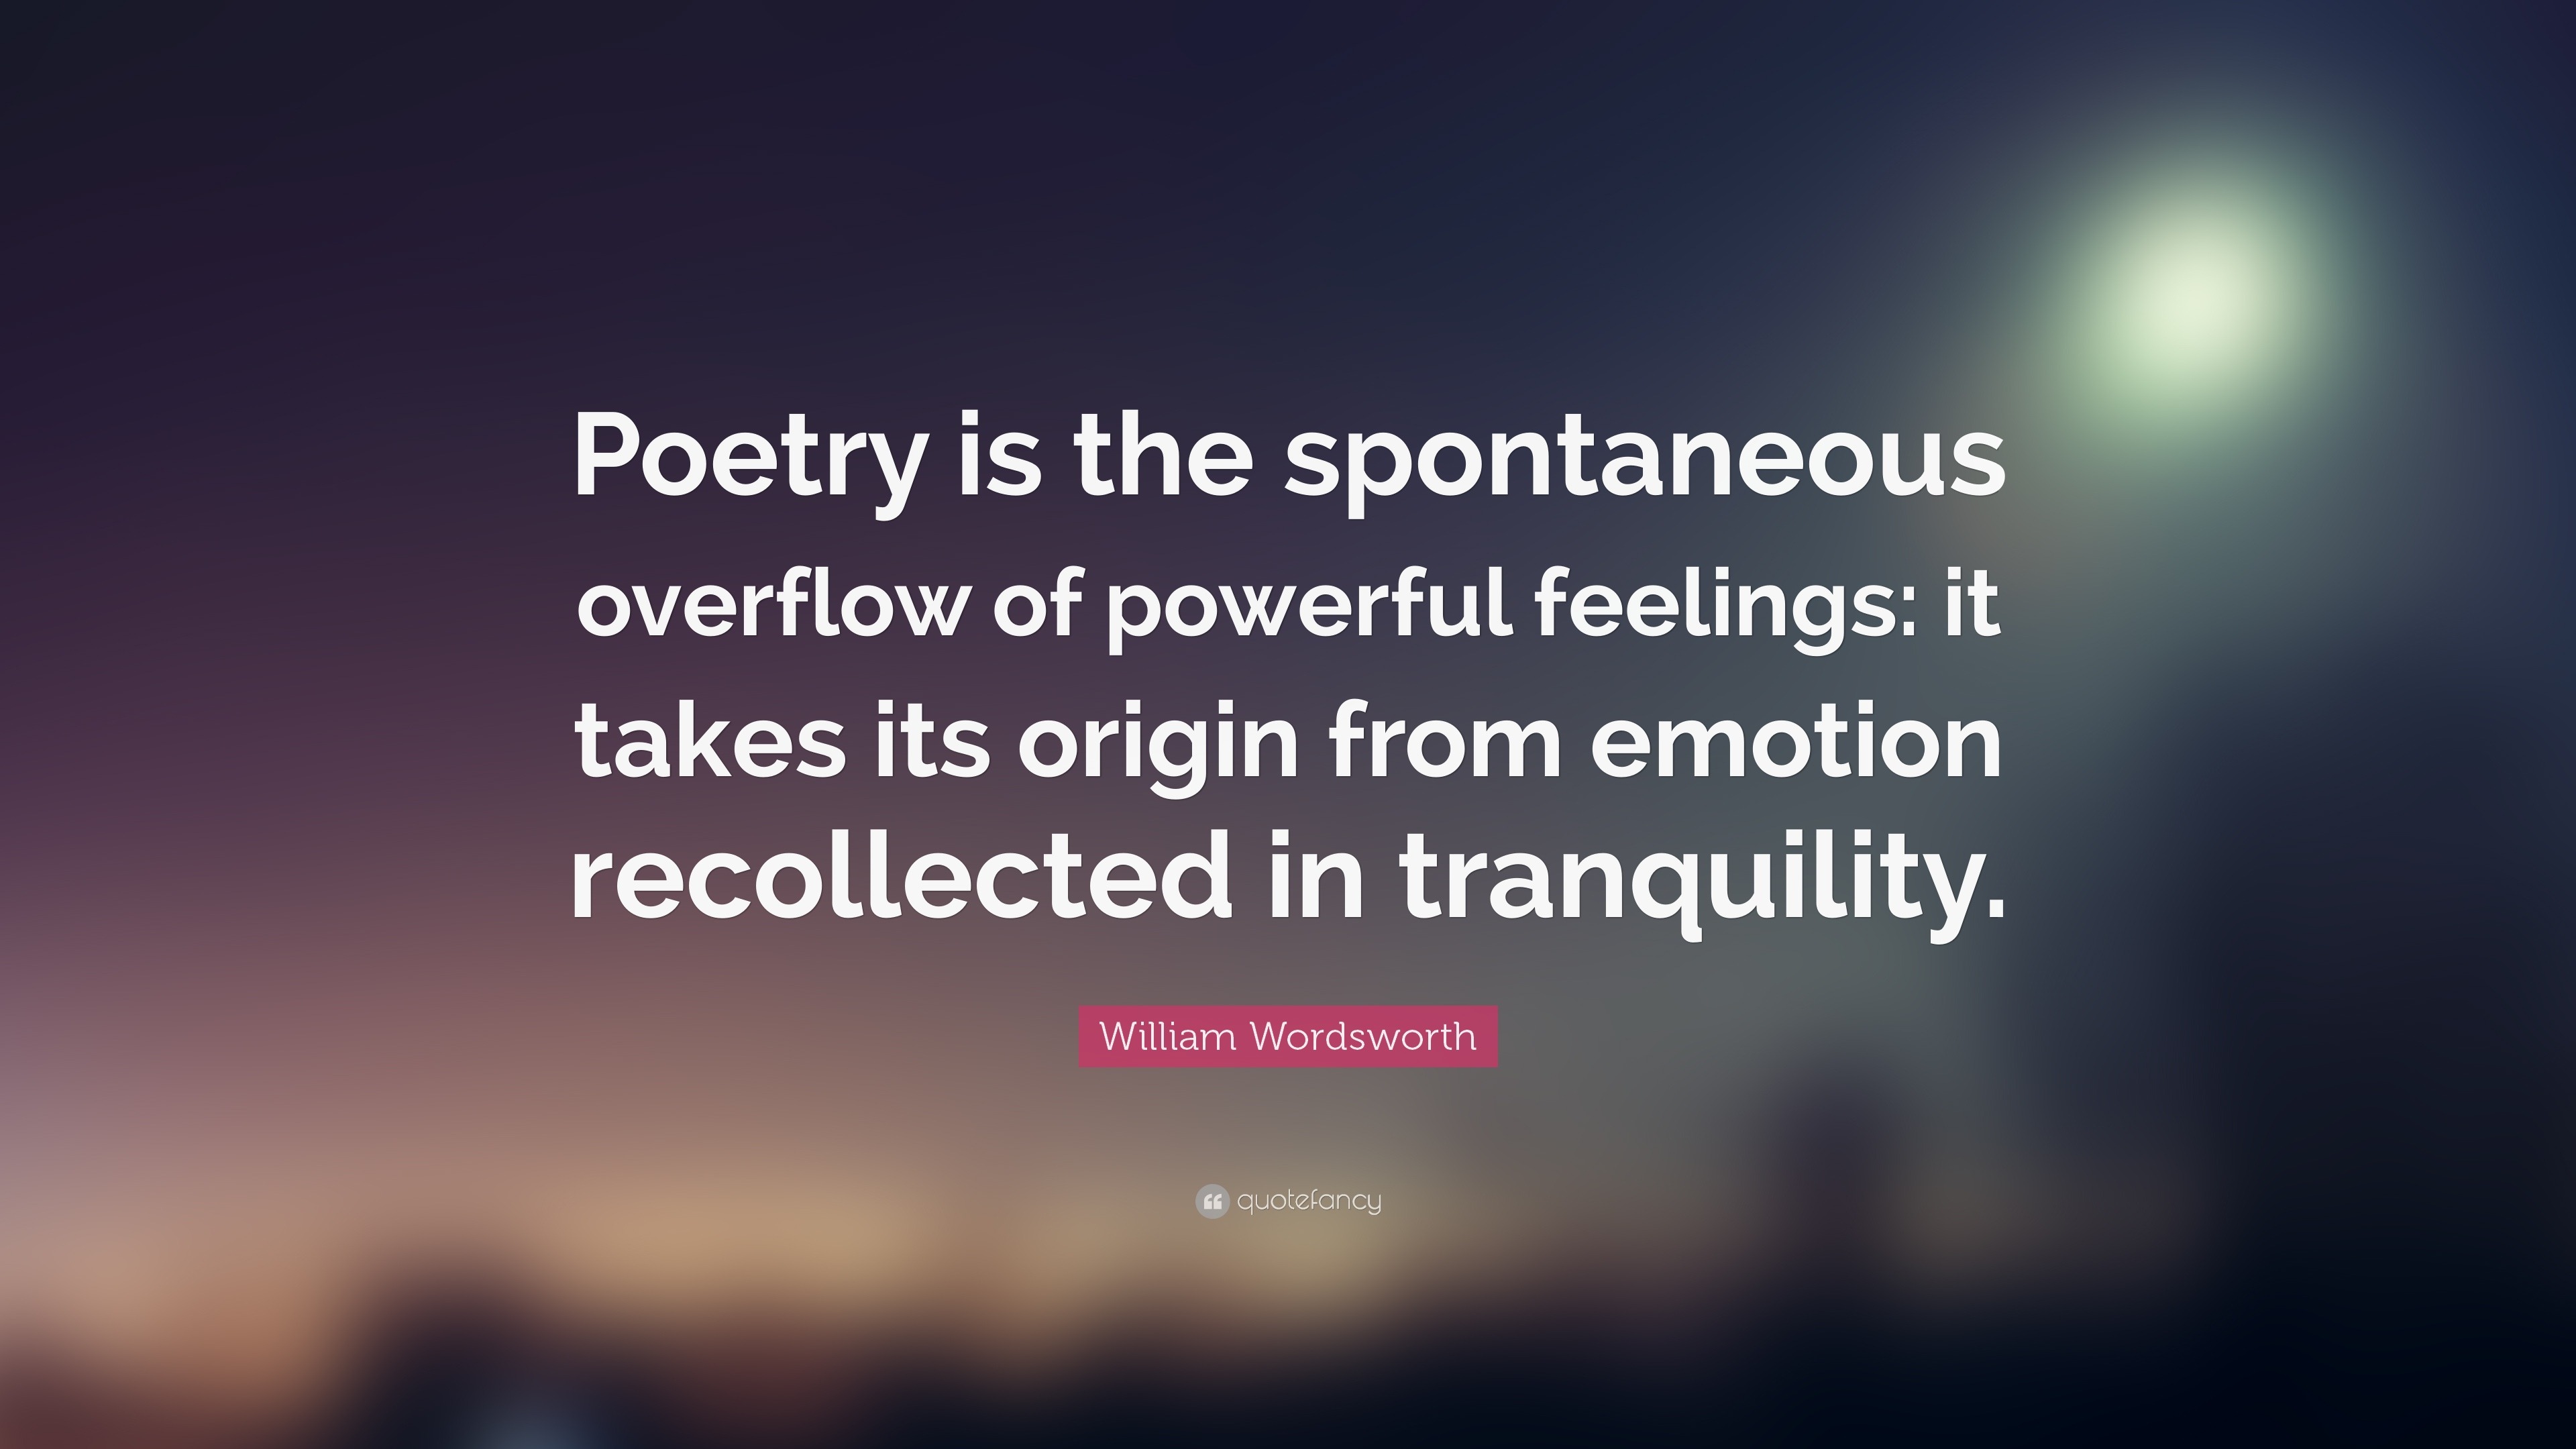 William Wordsworth Quote “Poetry is the spontaneous